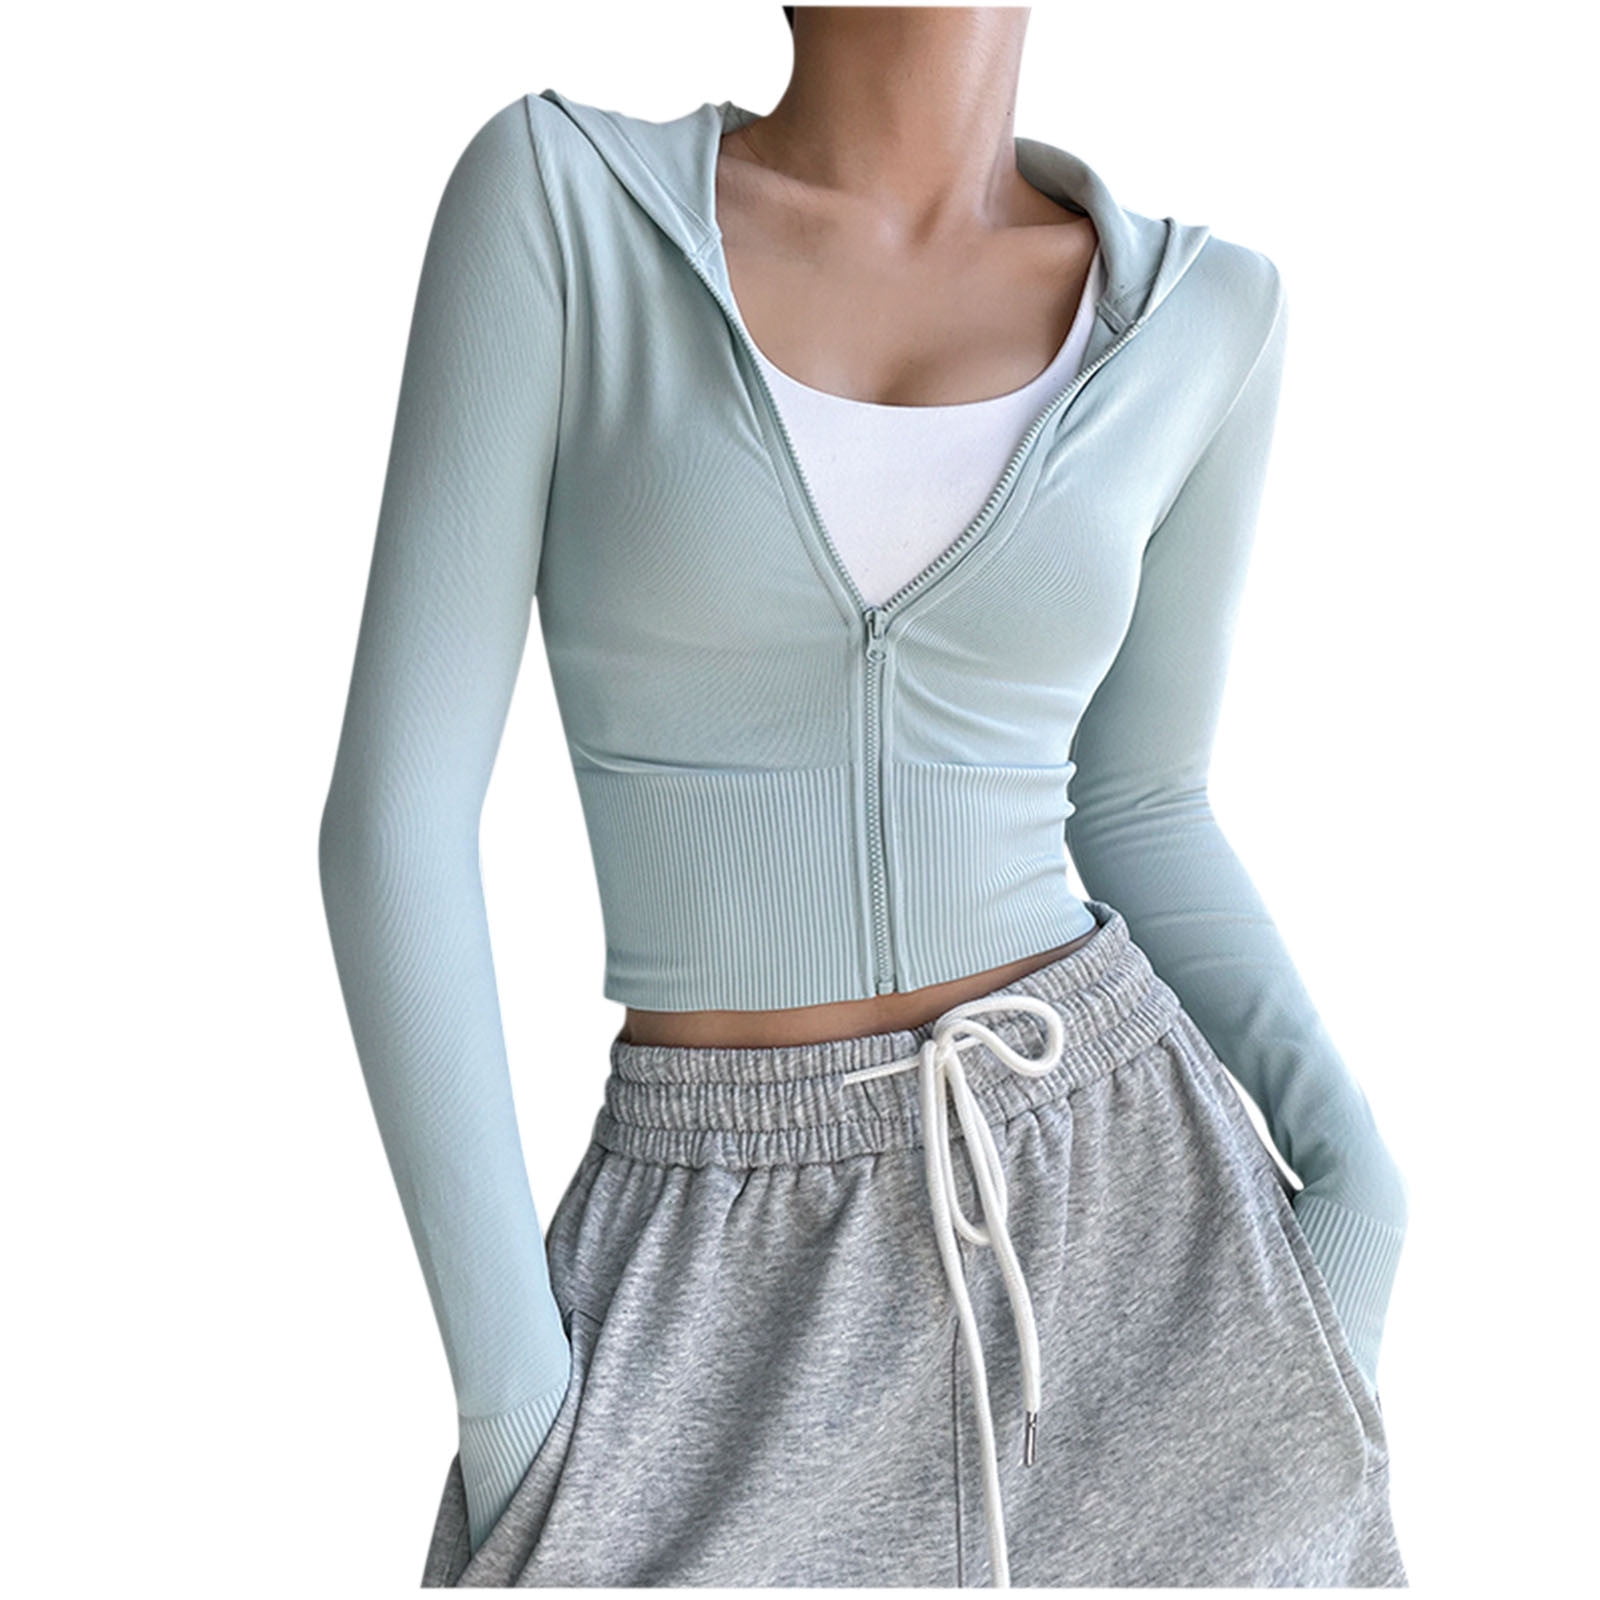 Womens Quick Drying Yoga Ladies Summer Jackets With Zipper Solid Color  Fitness Shirt For Jogging And Workout From Luluyogatwo, $27.57